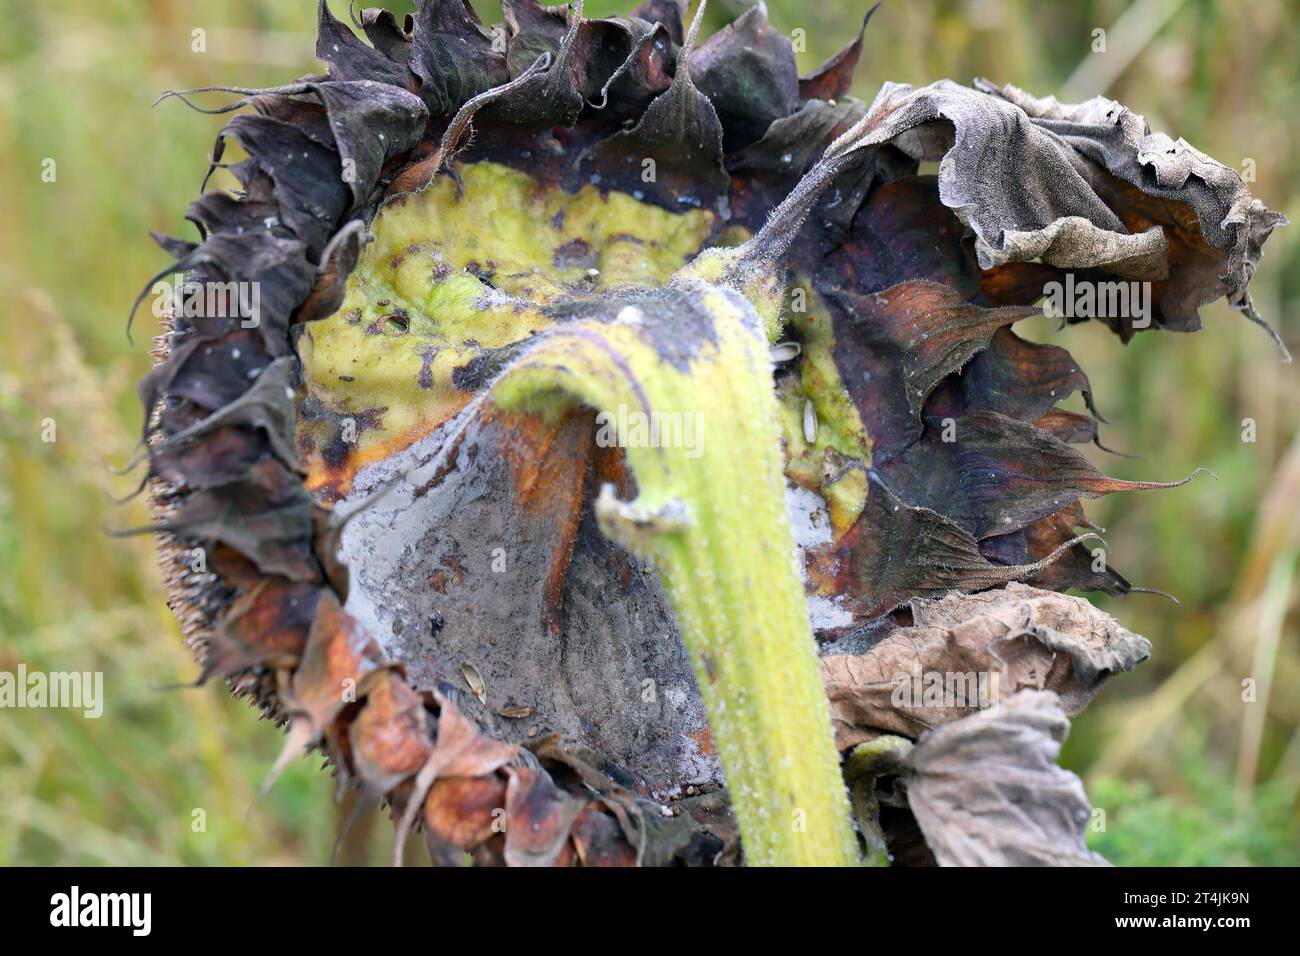 Symptoms of disease and infection on a sunflower plant. Stock Photo